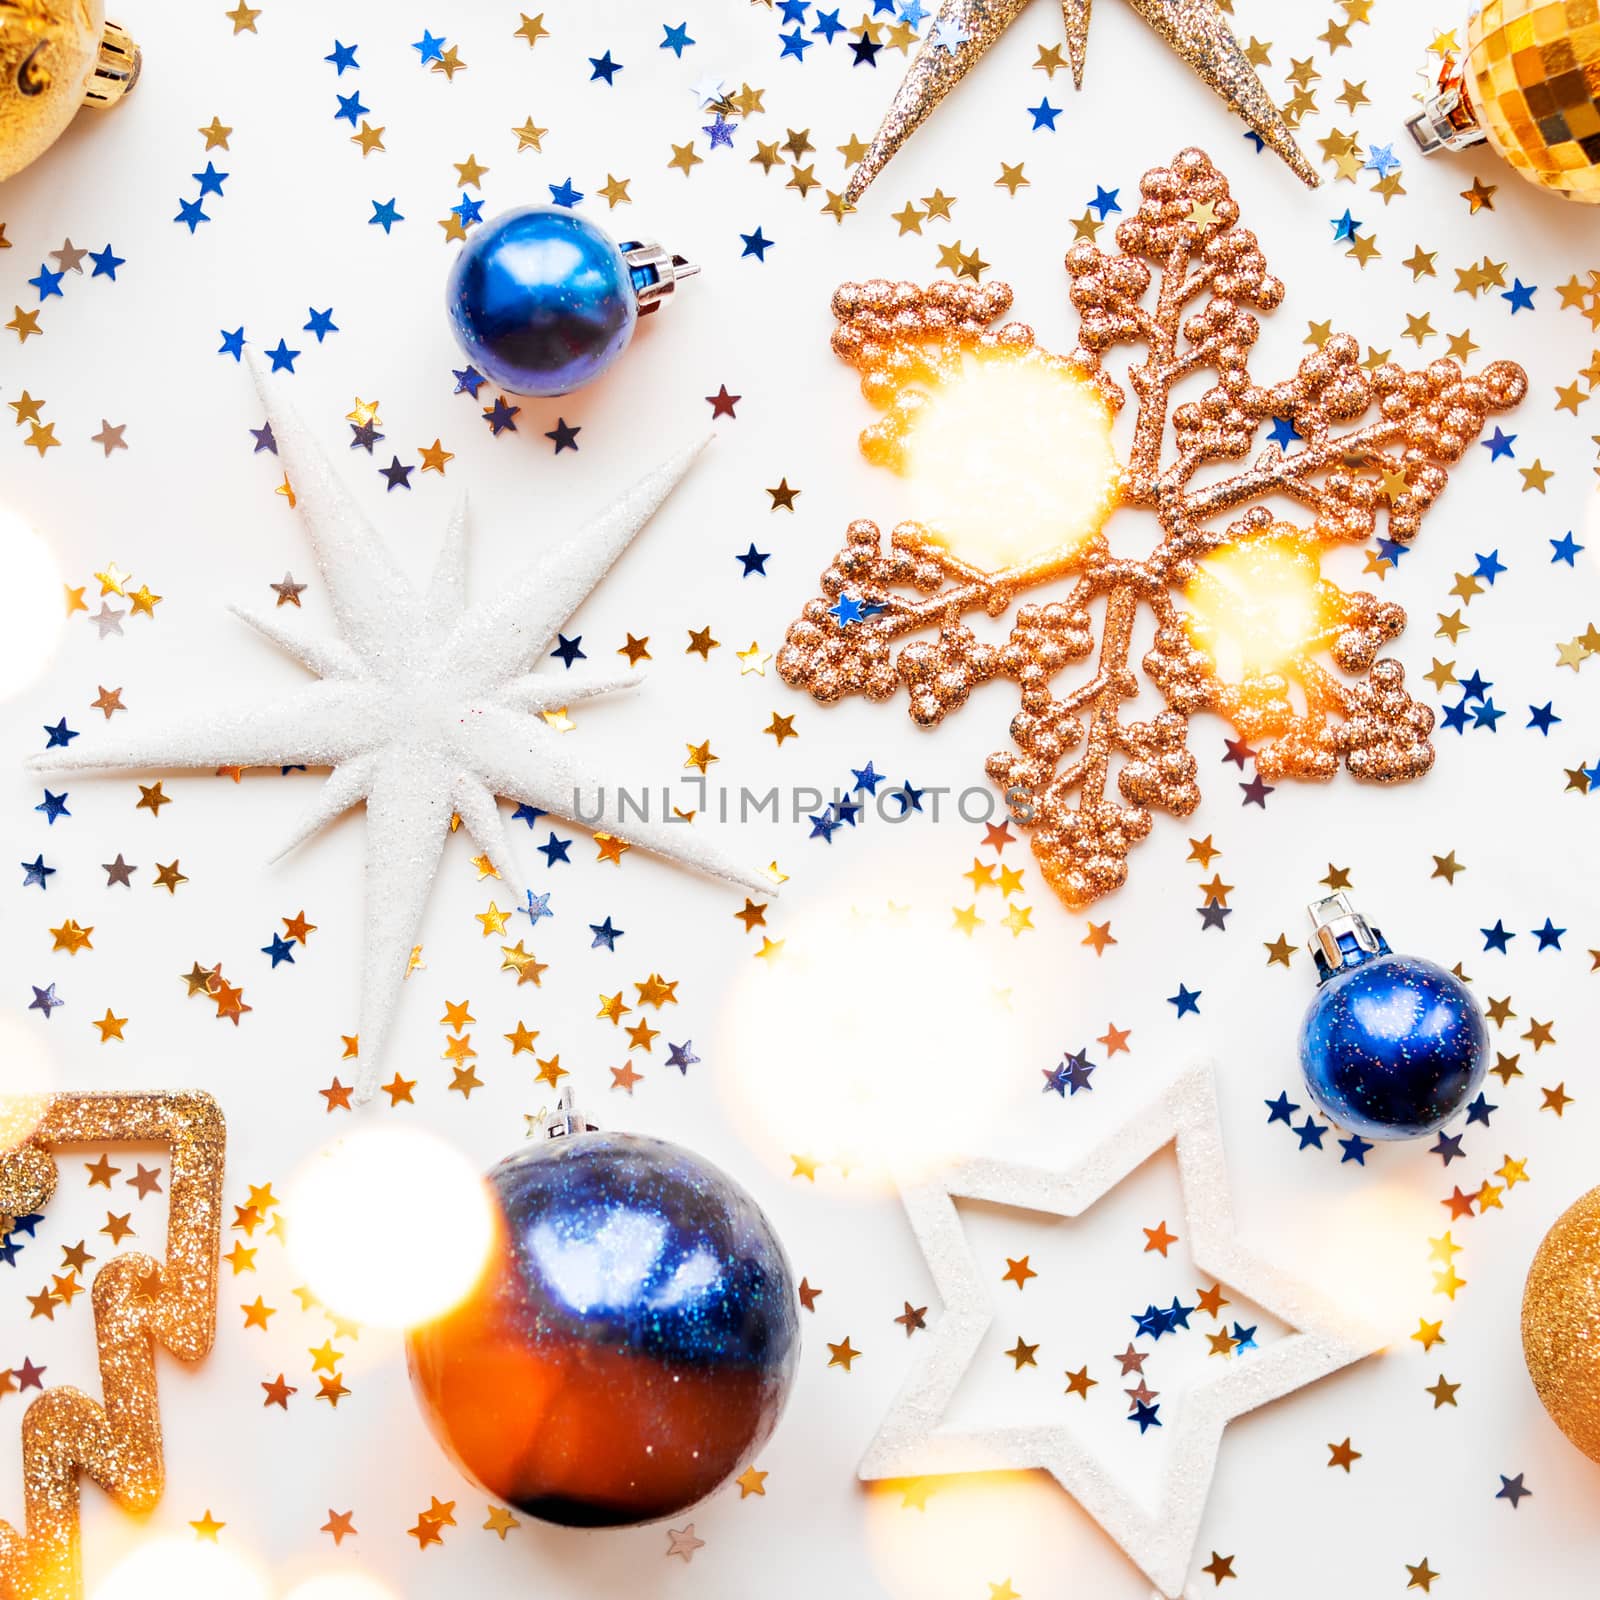 Christmas and New Year background with decorations - shiny stars, balls, snowflakes and confetti.